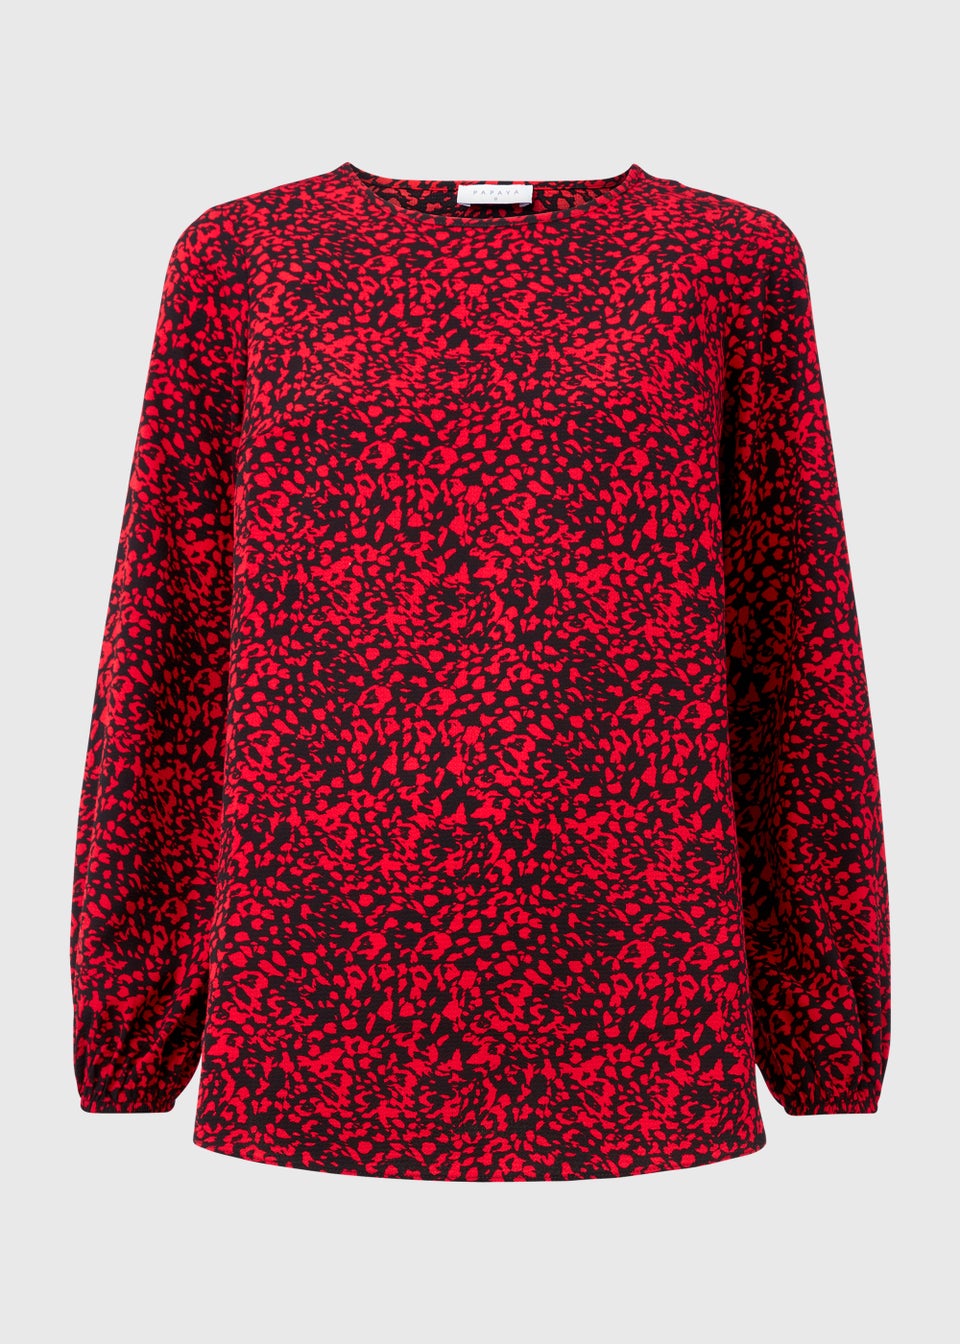 Red Mark Making Print Long Sleeve Bubble Top